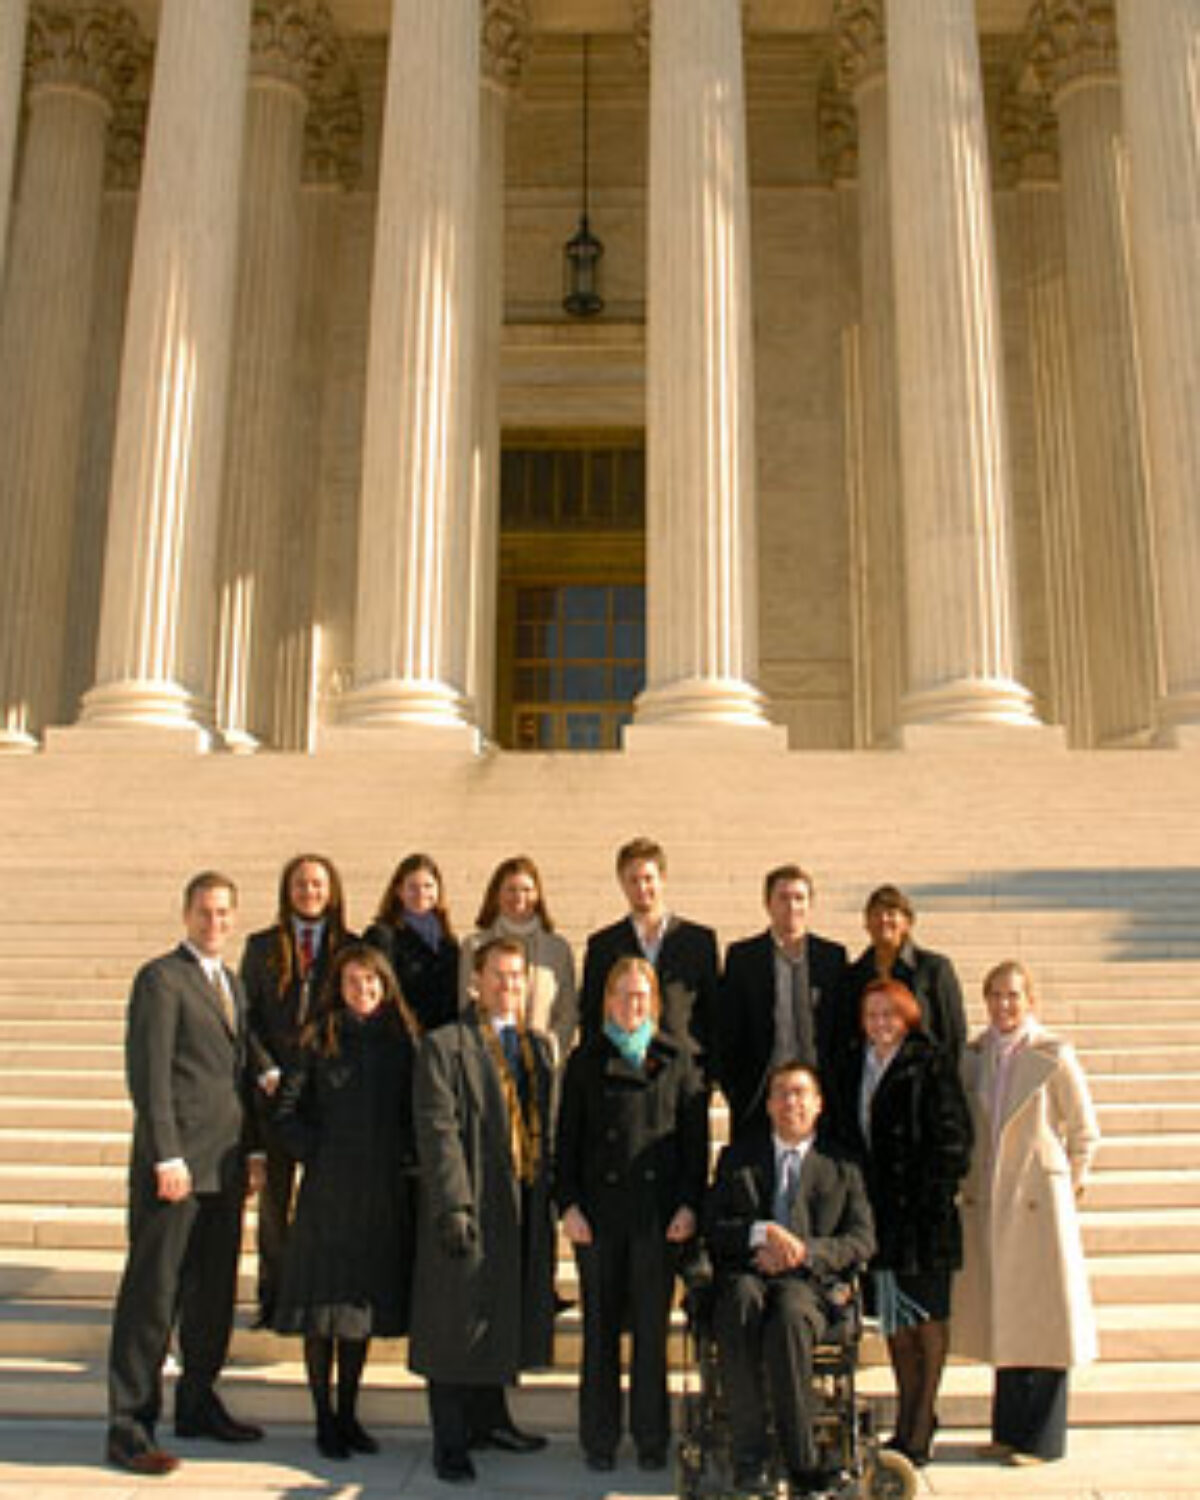 Members of Capital Punishment Clinic on steps of U.S. Supreme Court Building